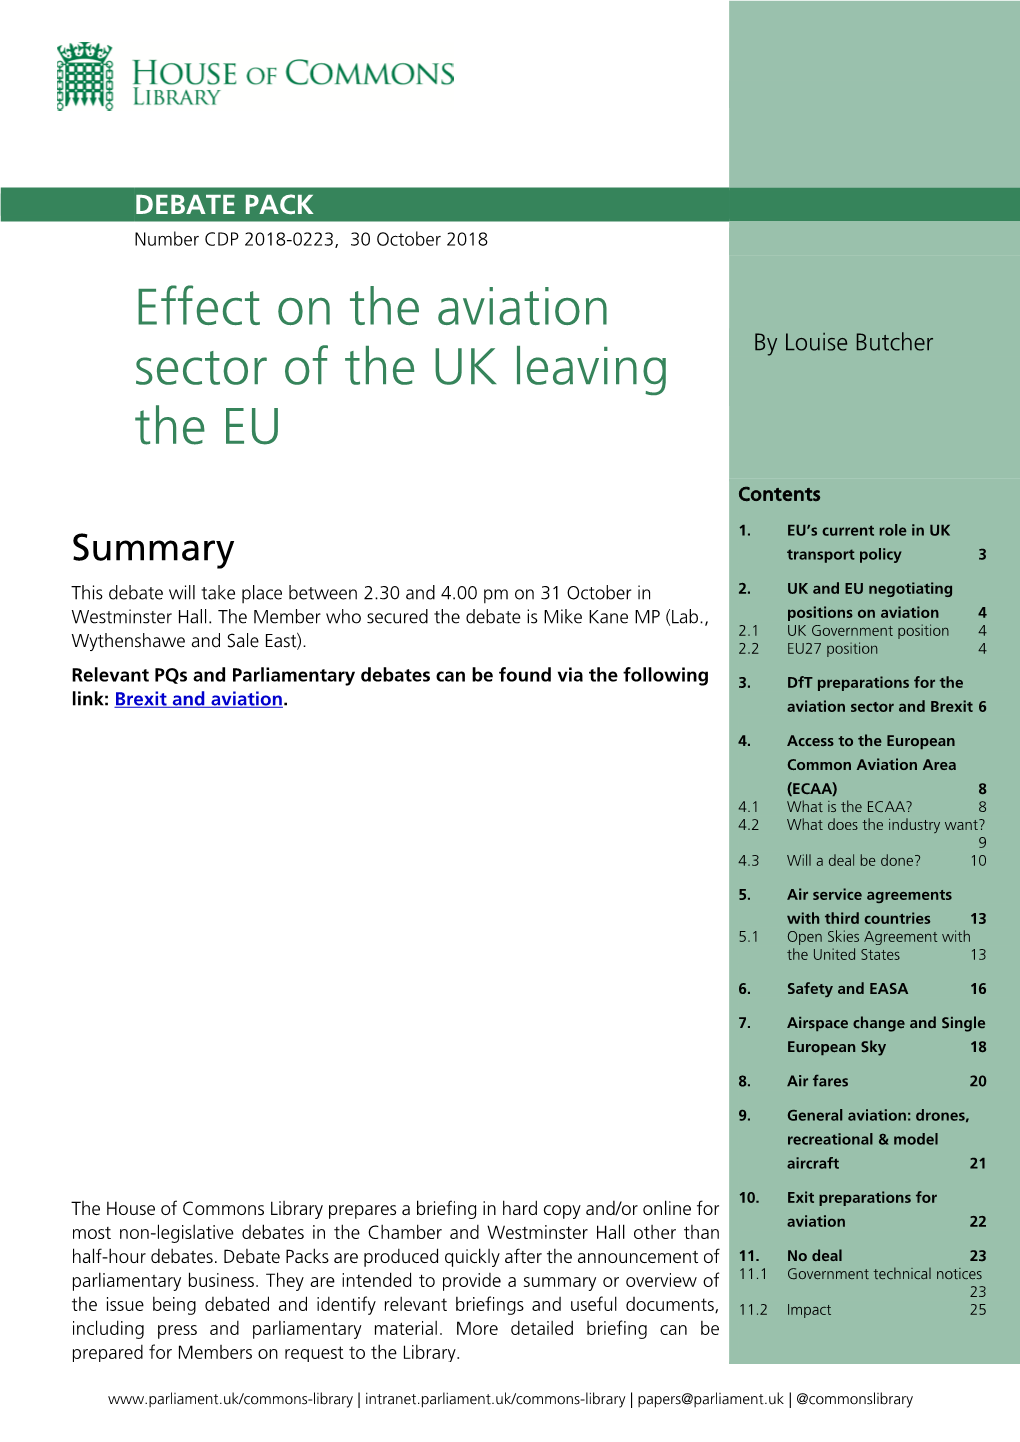 Effect on the Aviation Sector of the UK Leaving the EU 3